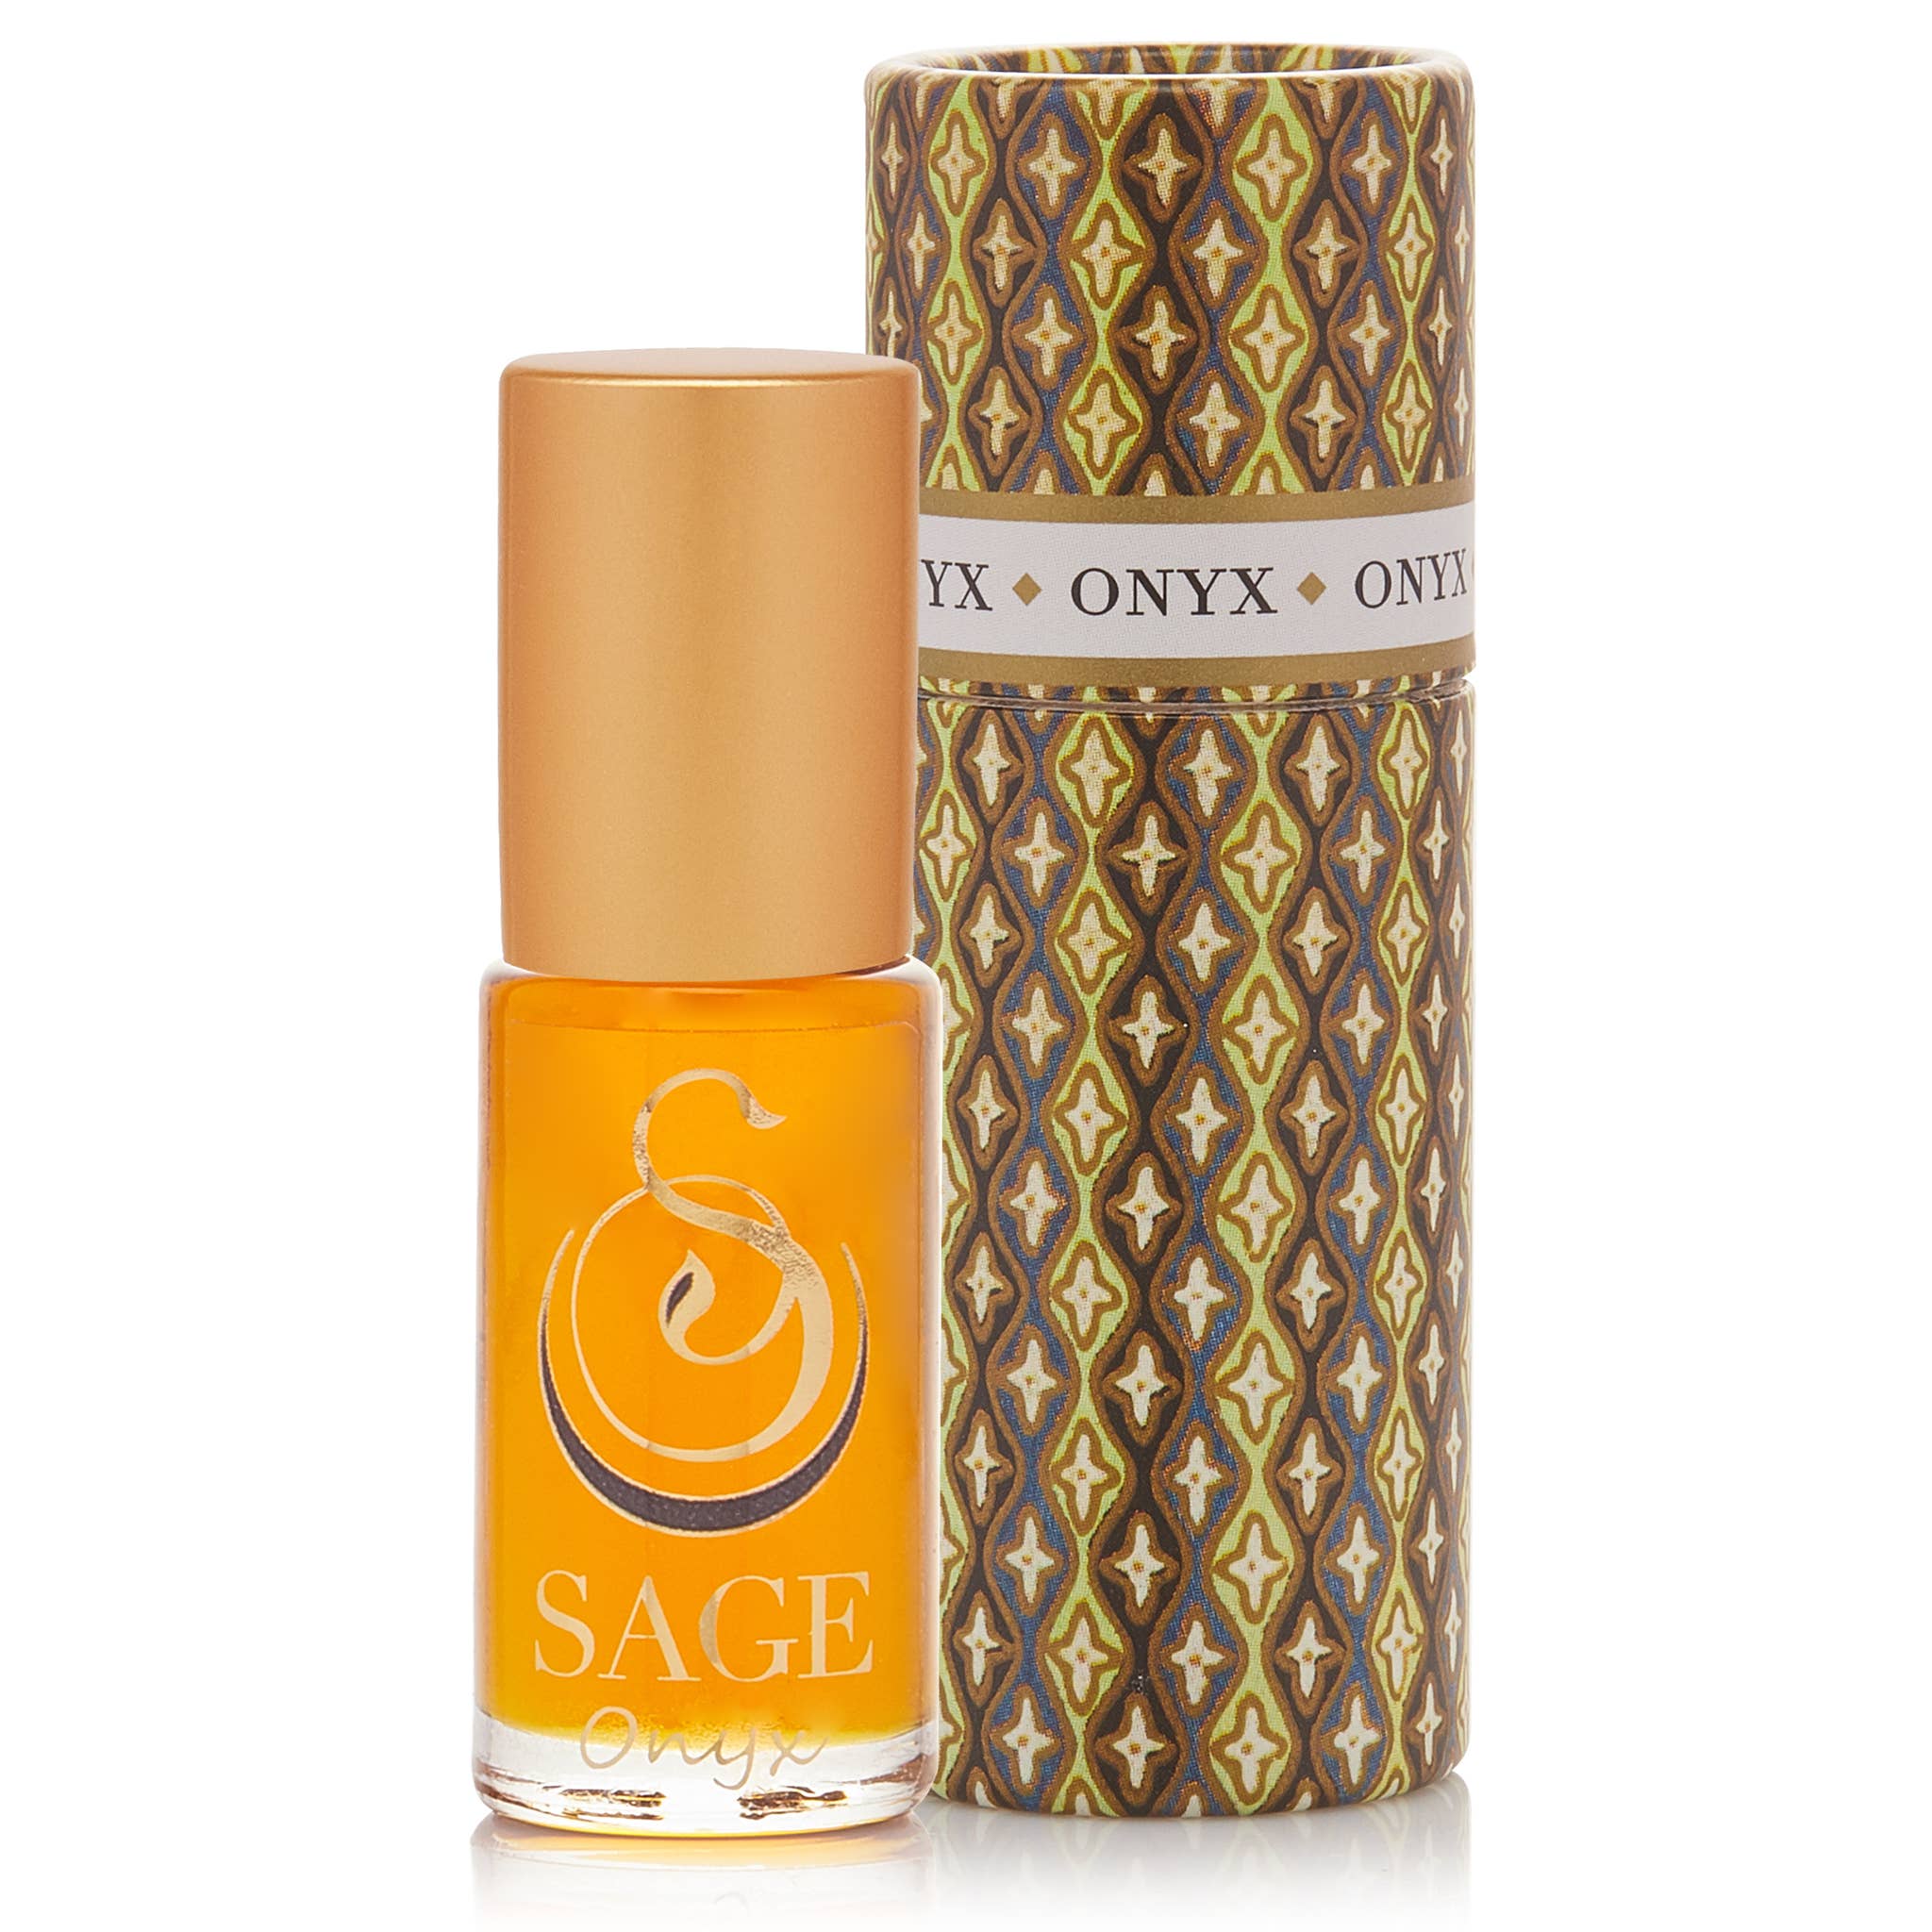 Onyx Gemstone Perfume Oil Concentrate Roll-On- 1/8 oz: Onyx Gemstone Perfume Oil  - 1/8 oz Roll-On